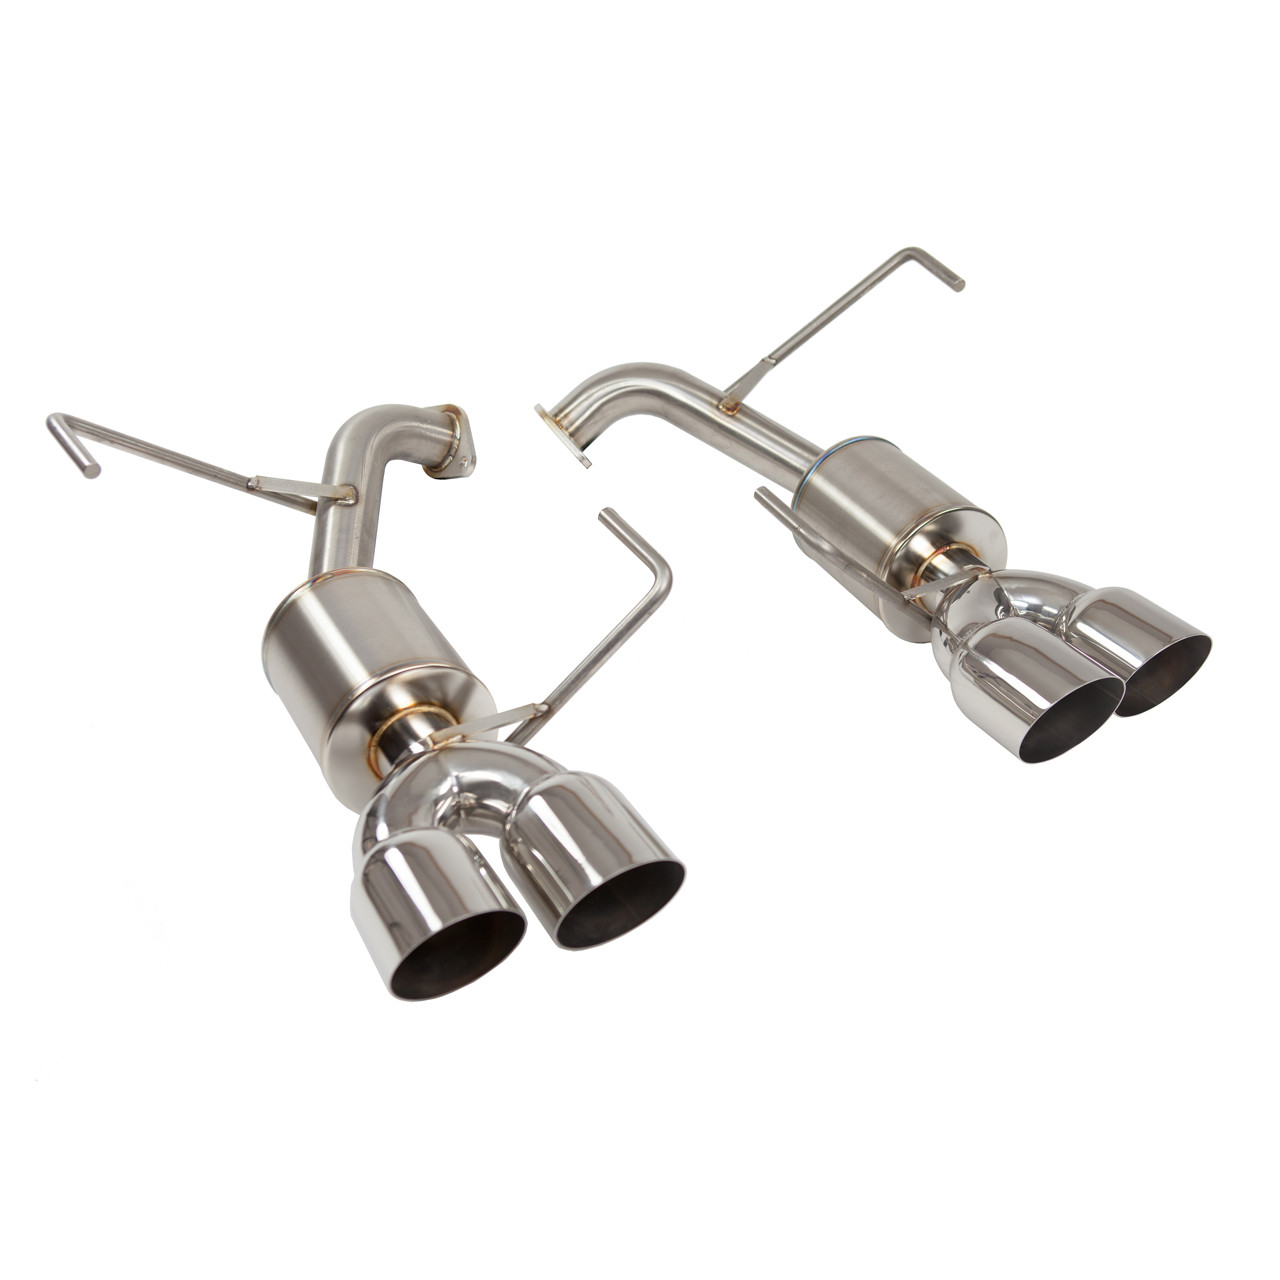 Nameless Performance Catback Exhaust with 5 inch mufflers and 3.5 inch single wall exhaust tips